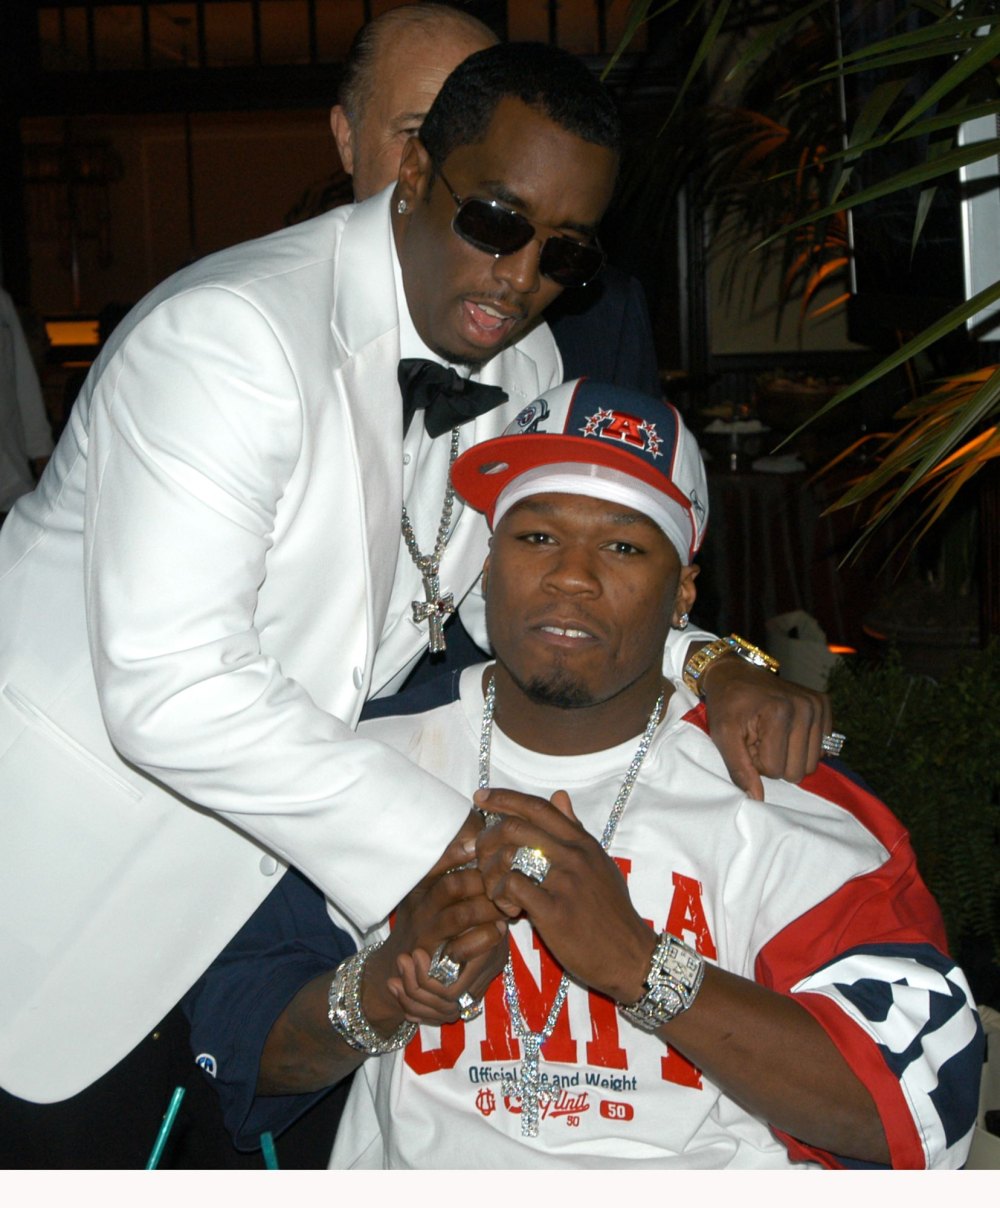 P Diddy, 50 Cent (Photo by Denise Truscello/WireImage for Universal Music Group)